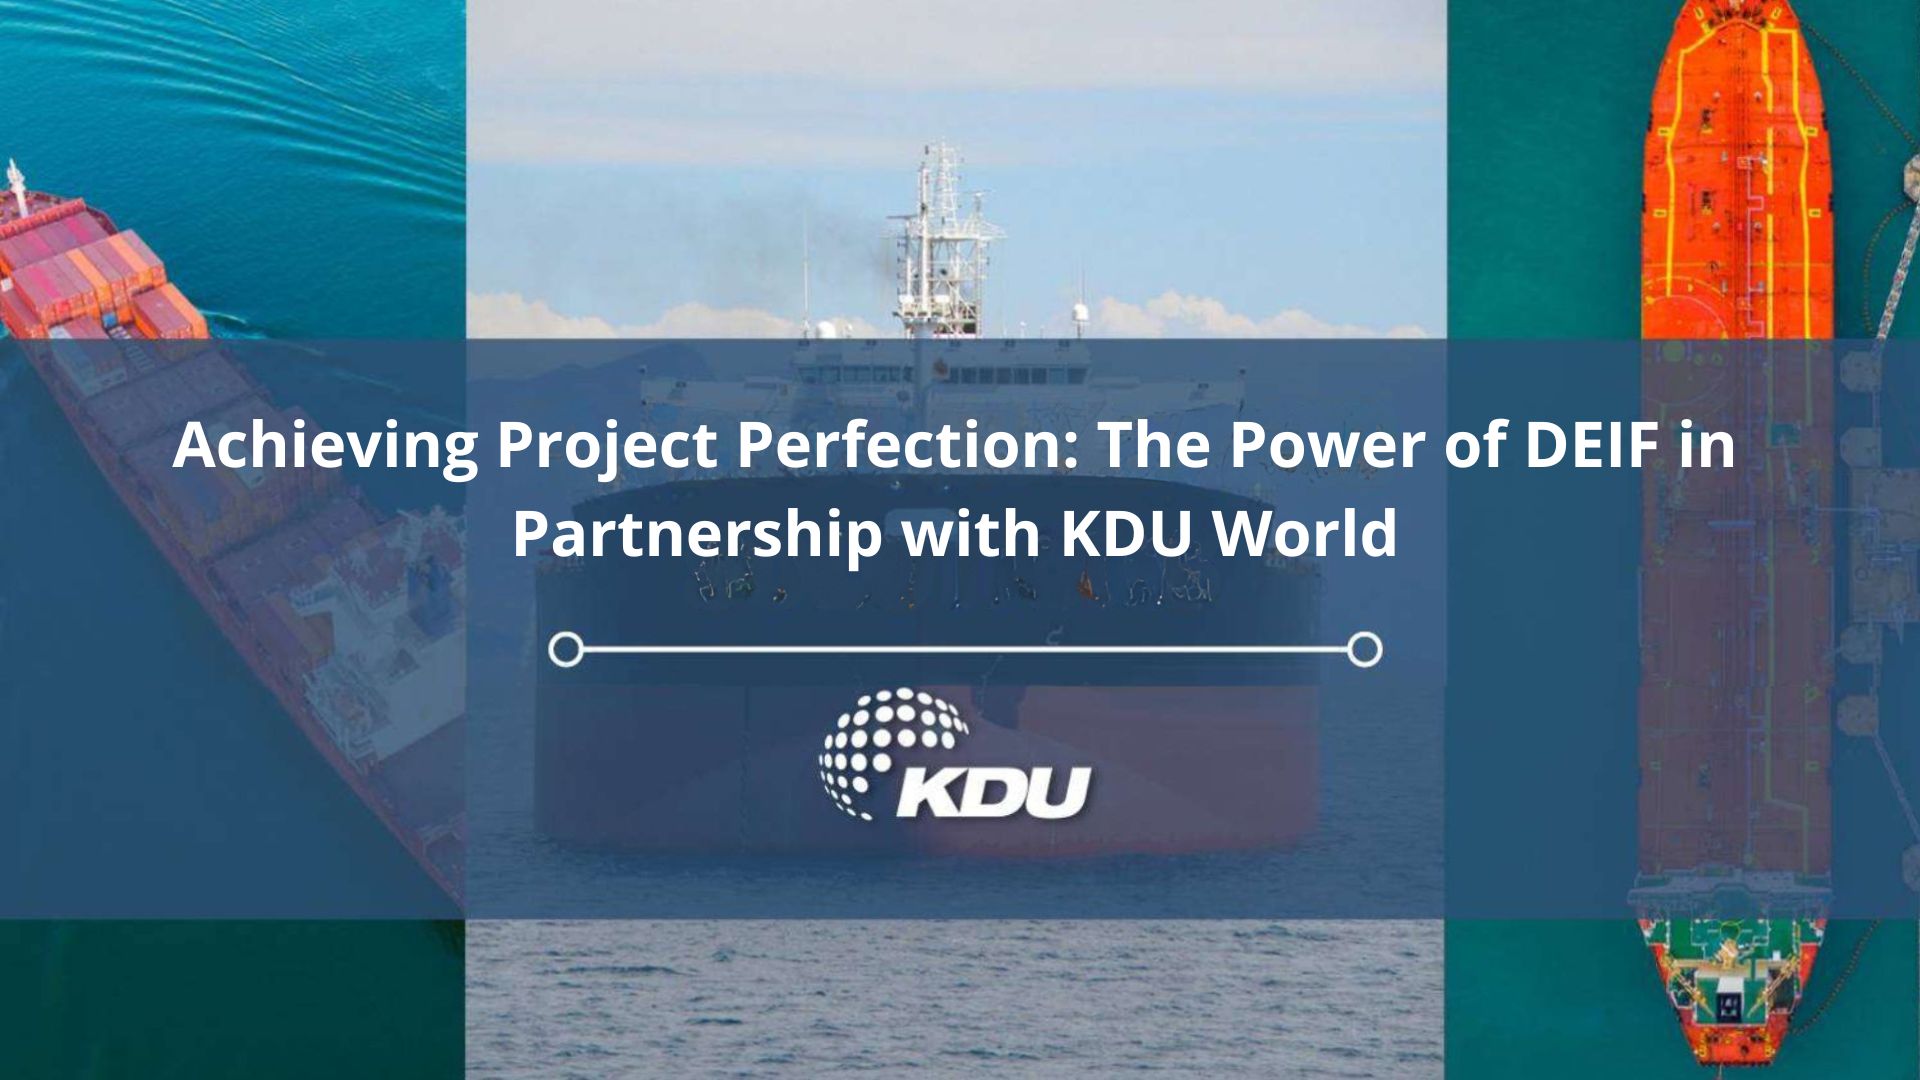 The Power of DEIF in Partnership with KDU World